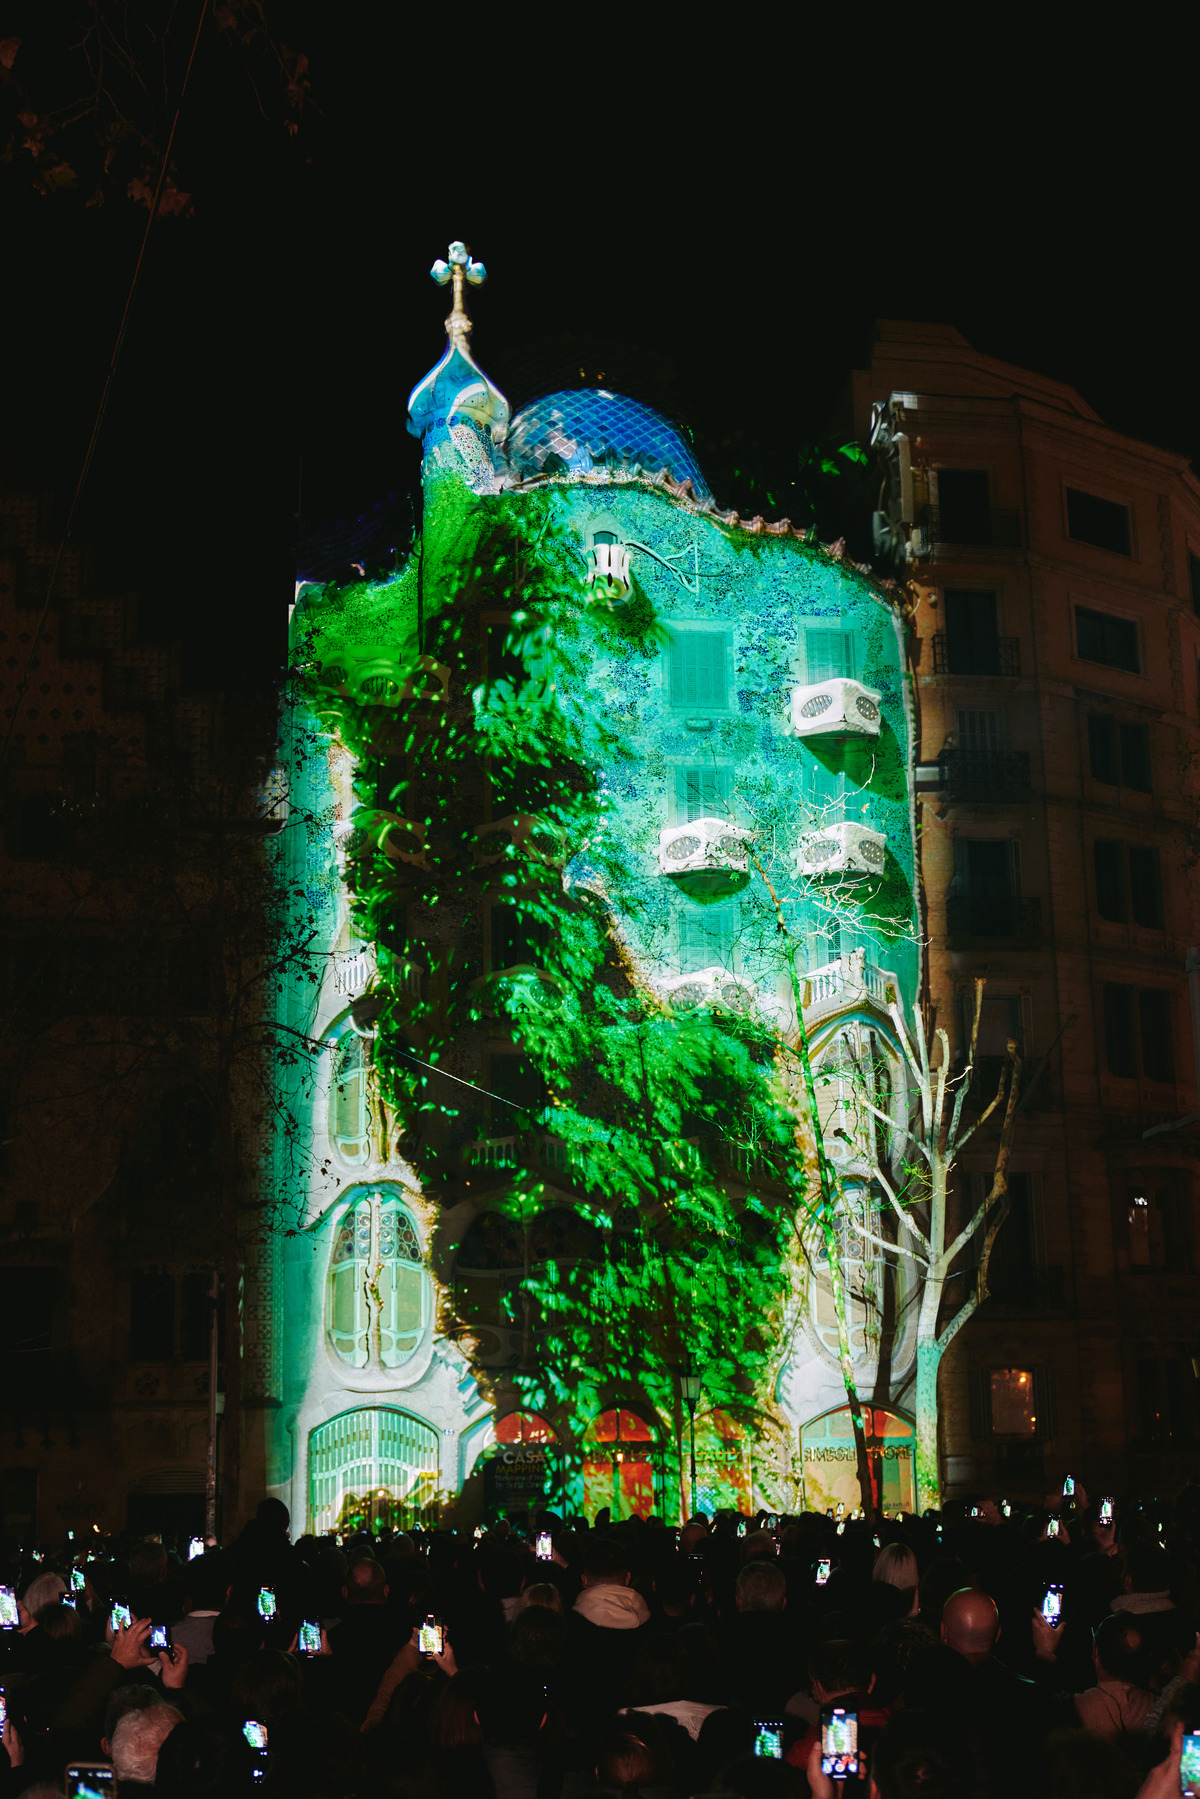 A night-time photo of a projection on Casa Batlló, here bathed in green and blue patterns